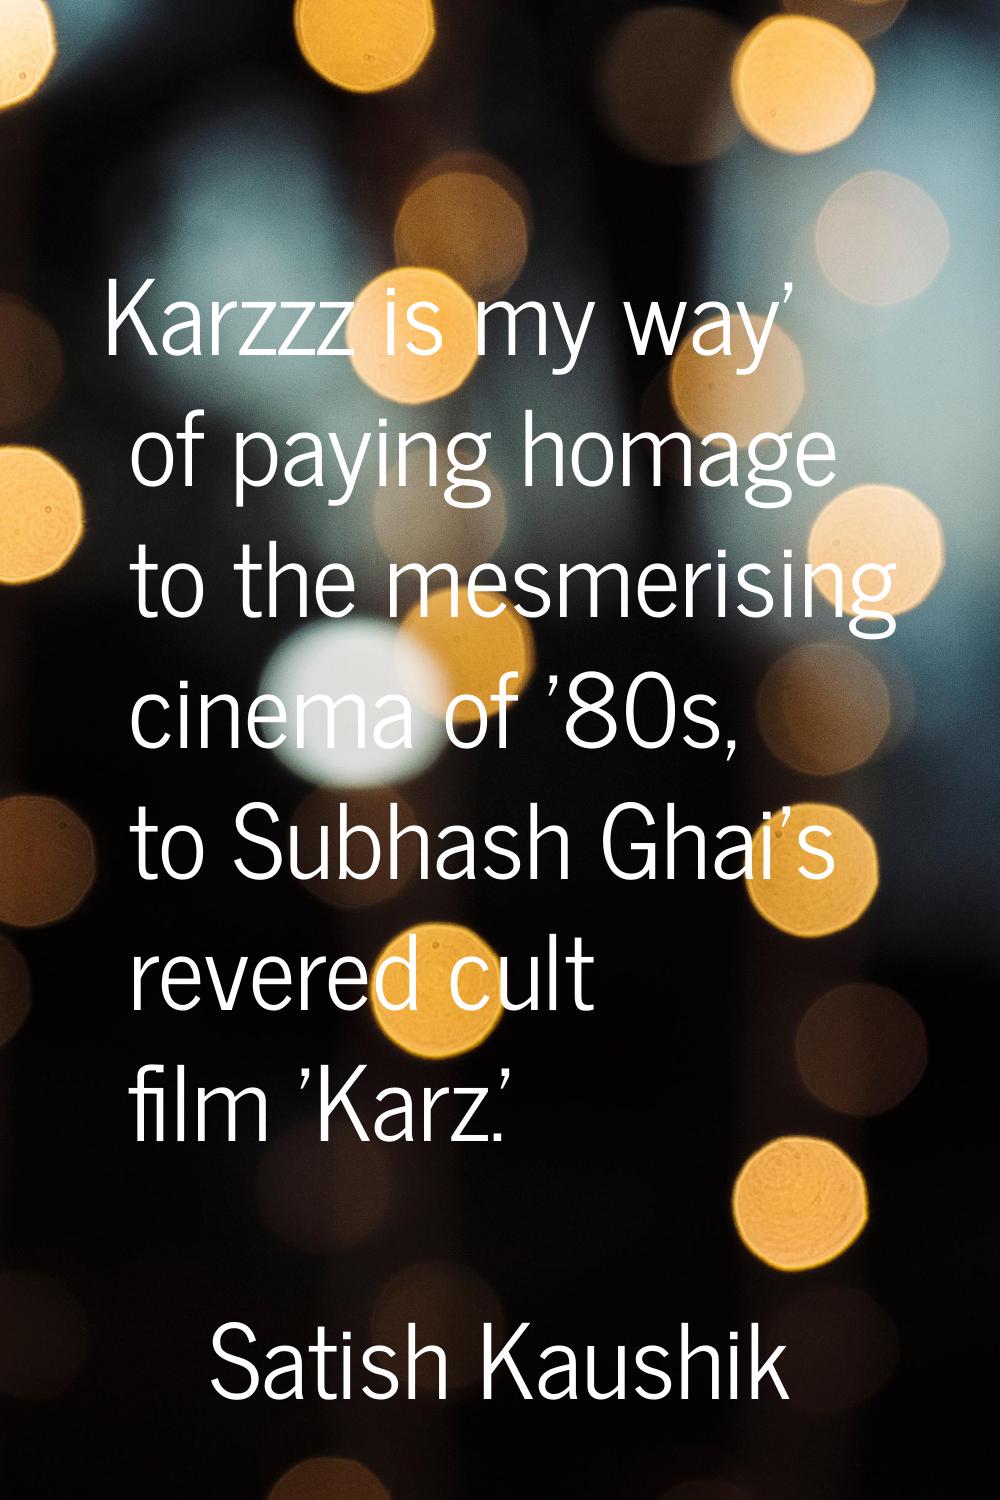 Karzzz is my way' of paying homage to the mesmerising cinema of '80s, to Subhash Ghai's revered cul